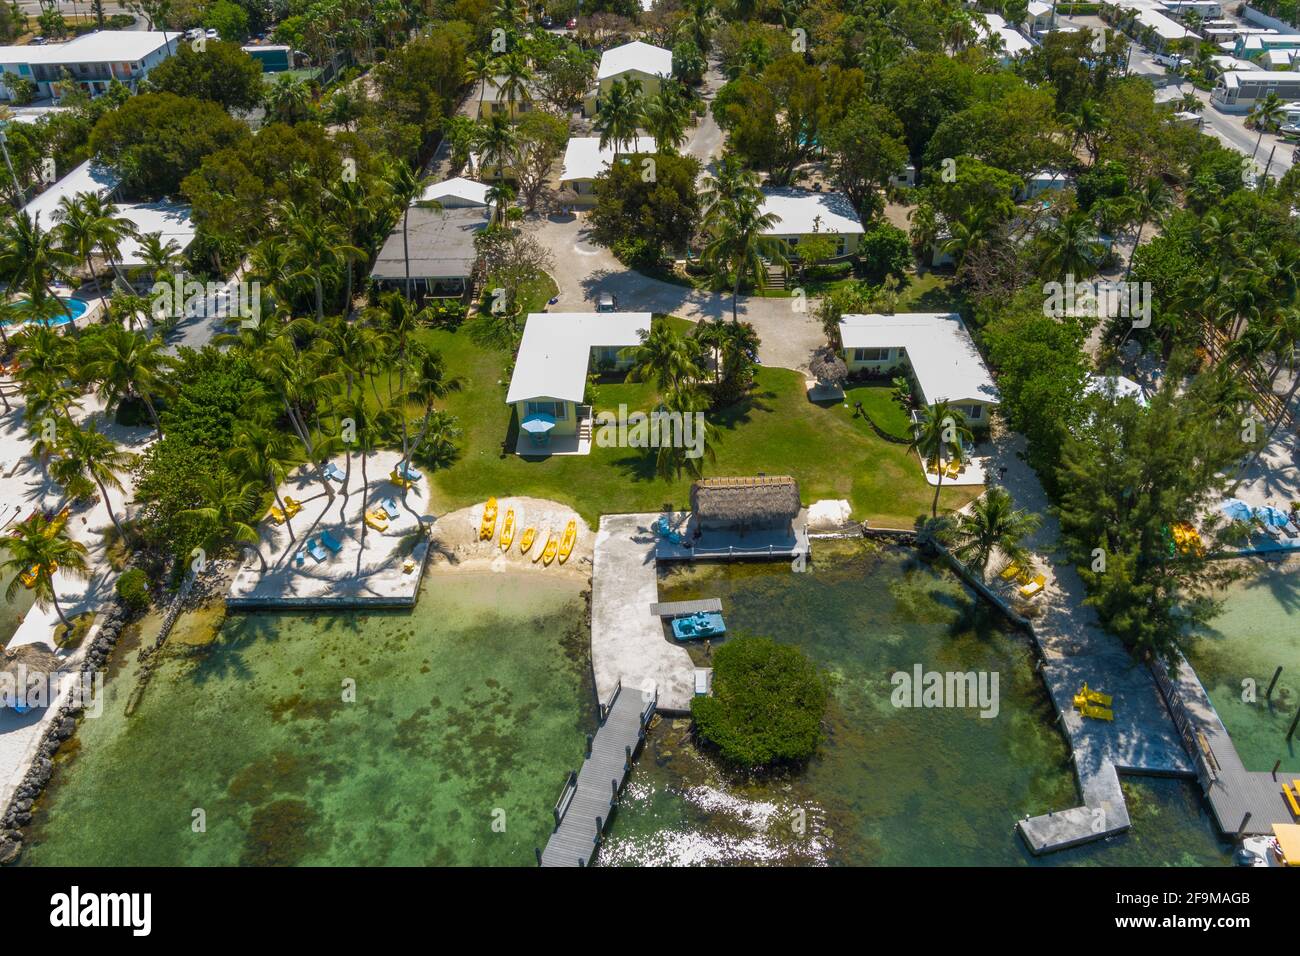 Aerial view of small hotel resort in Key Largo Florida USA Stock Photo